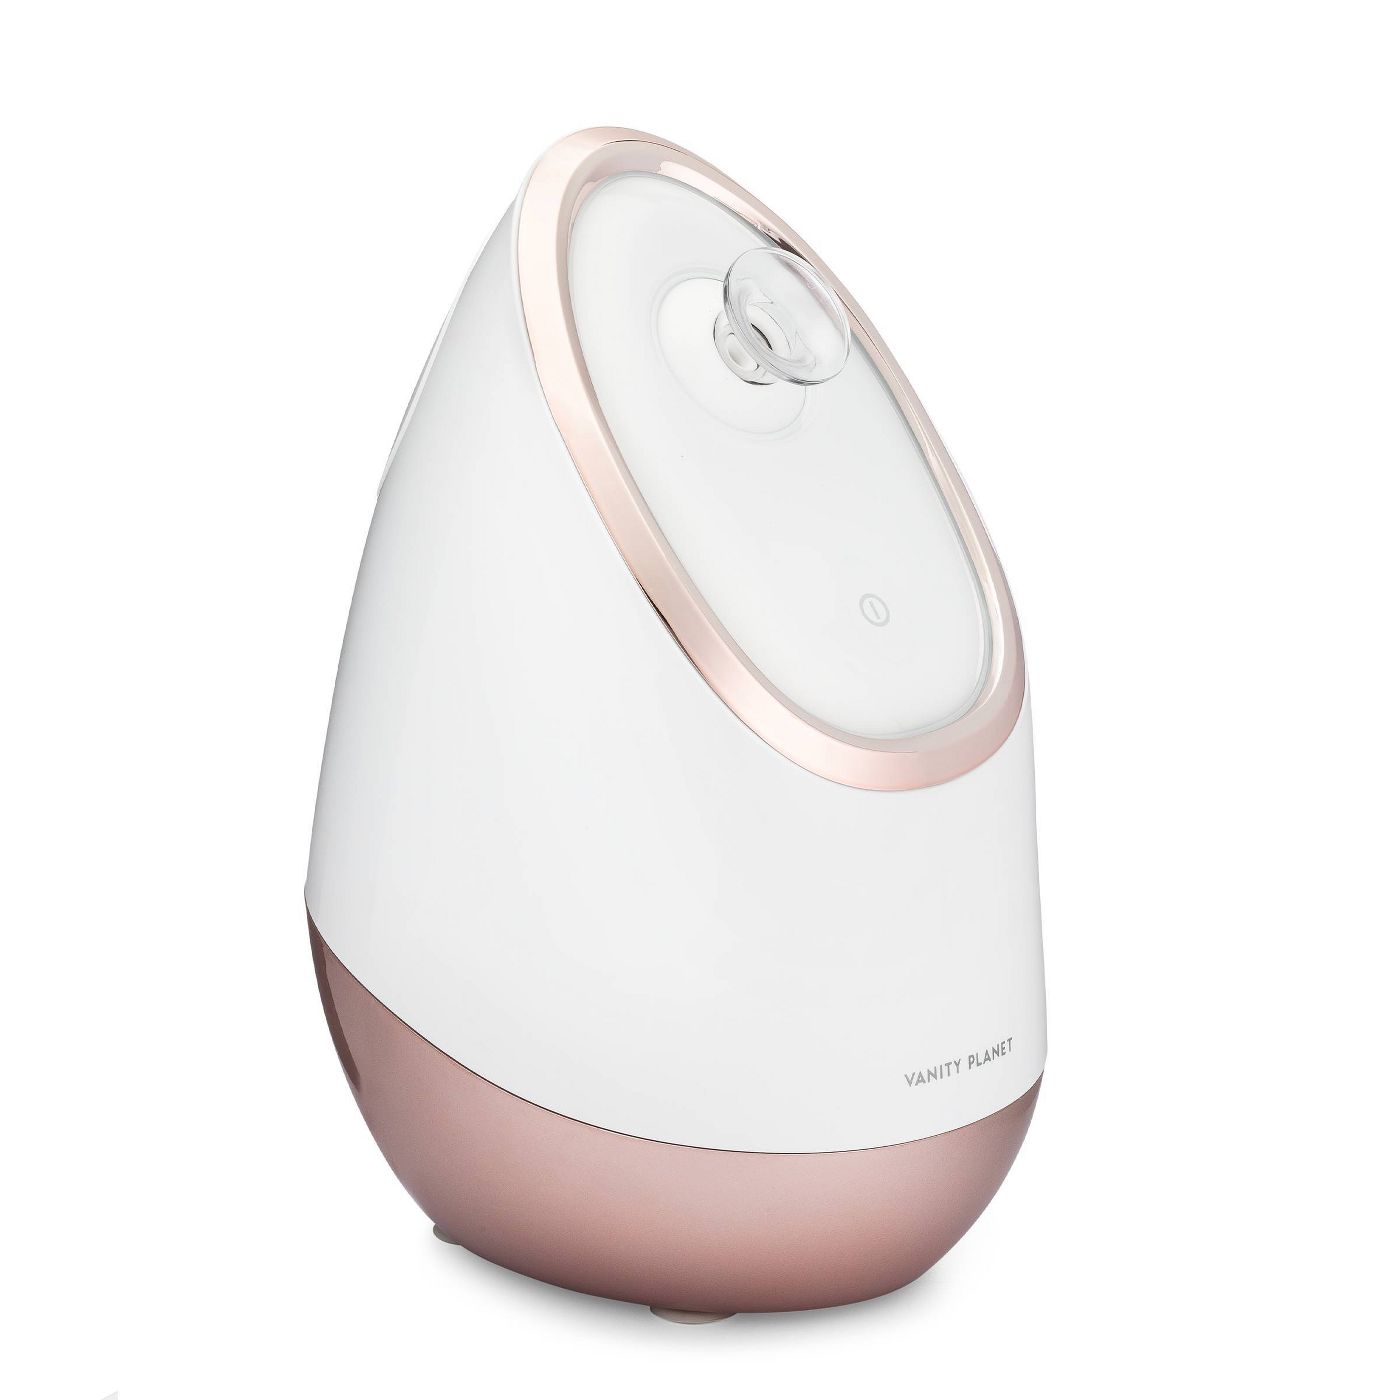 Vanity Planet Facial Steamer - White & Rose Gold - 1ct - image 2 of 6